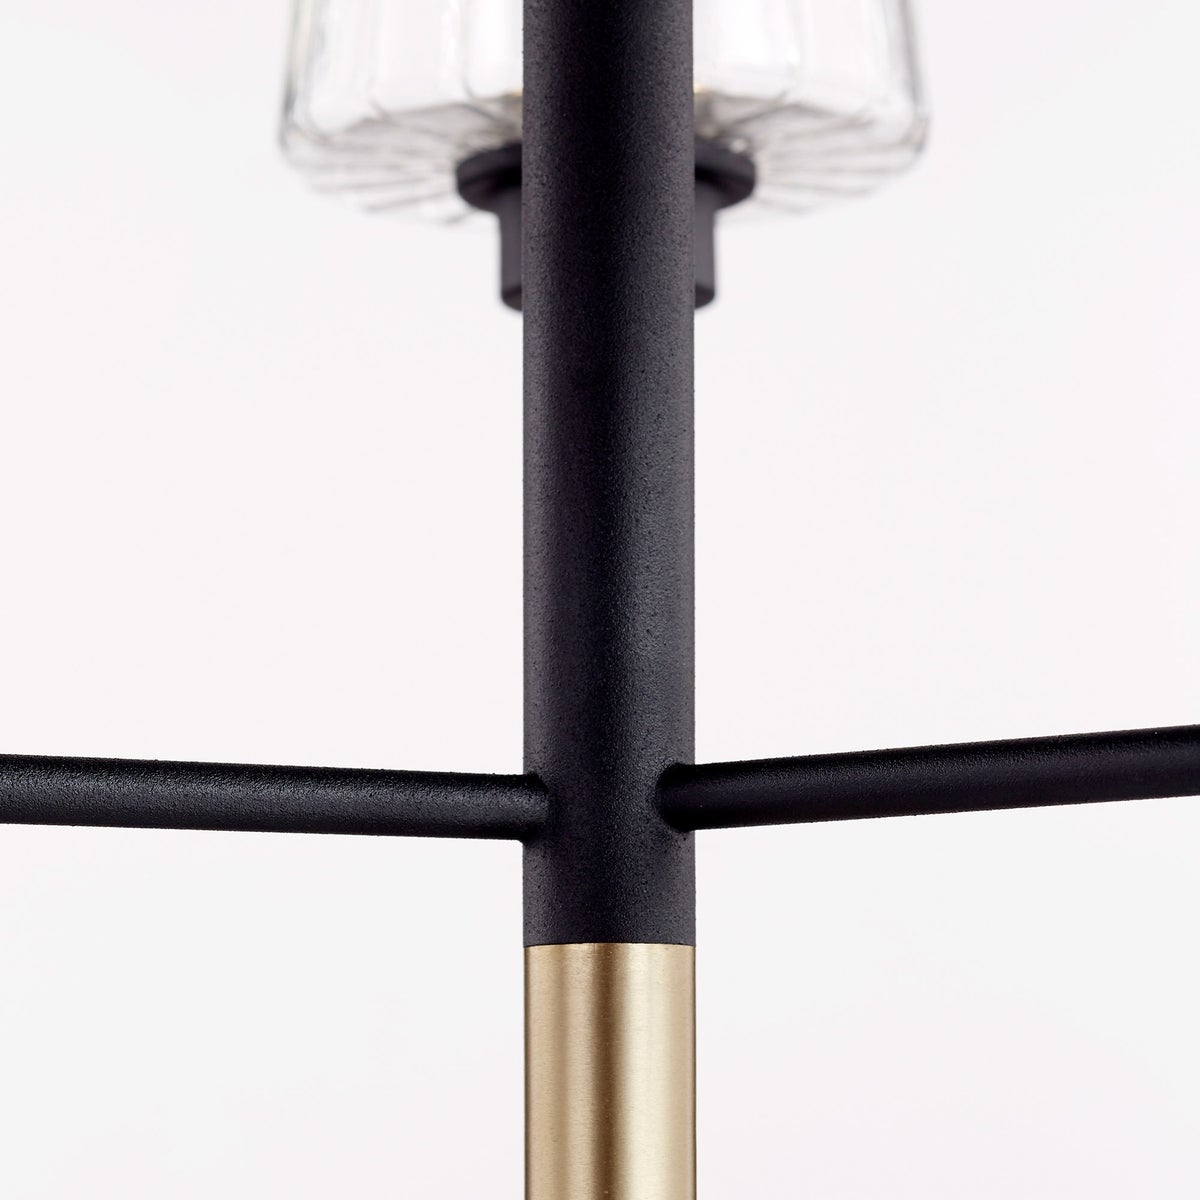 Bathroom chandelier with three clear glass shades, tulip-shaped and fluted. Minimalist-inspired design with aged brass and noir finish. Suitable for bathrooms, outdoor kitchens, and covered patios. Adjustable chain/stem hung suspension system.